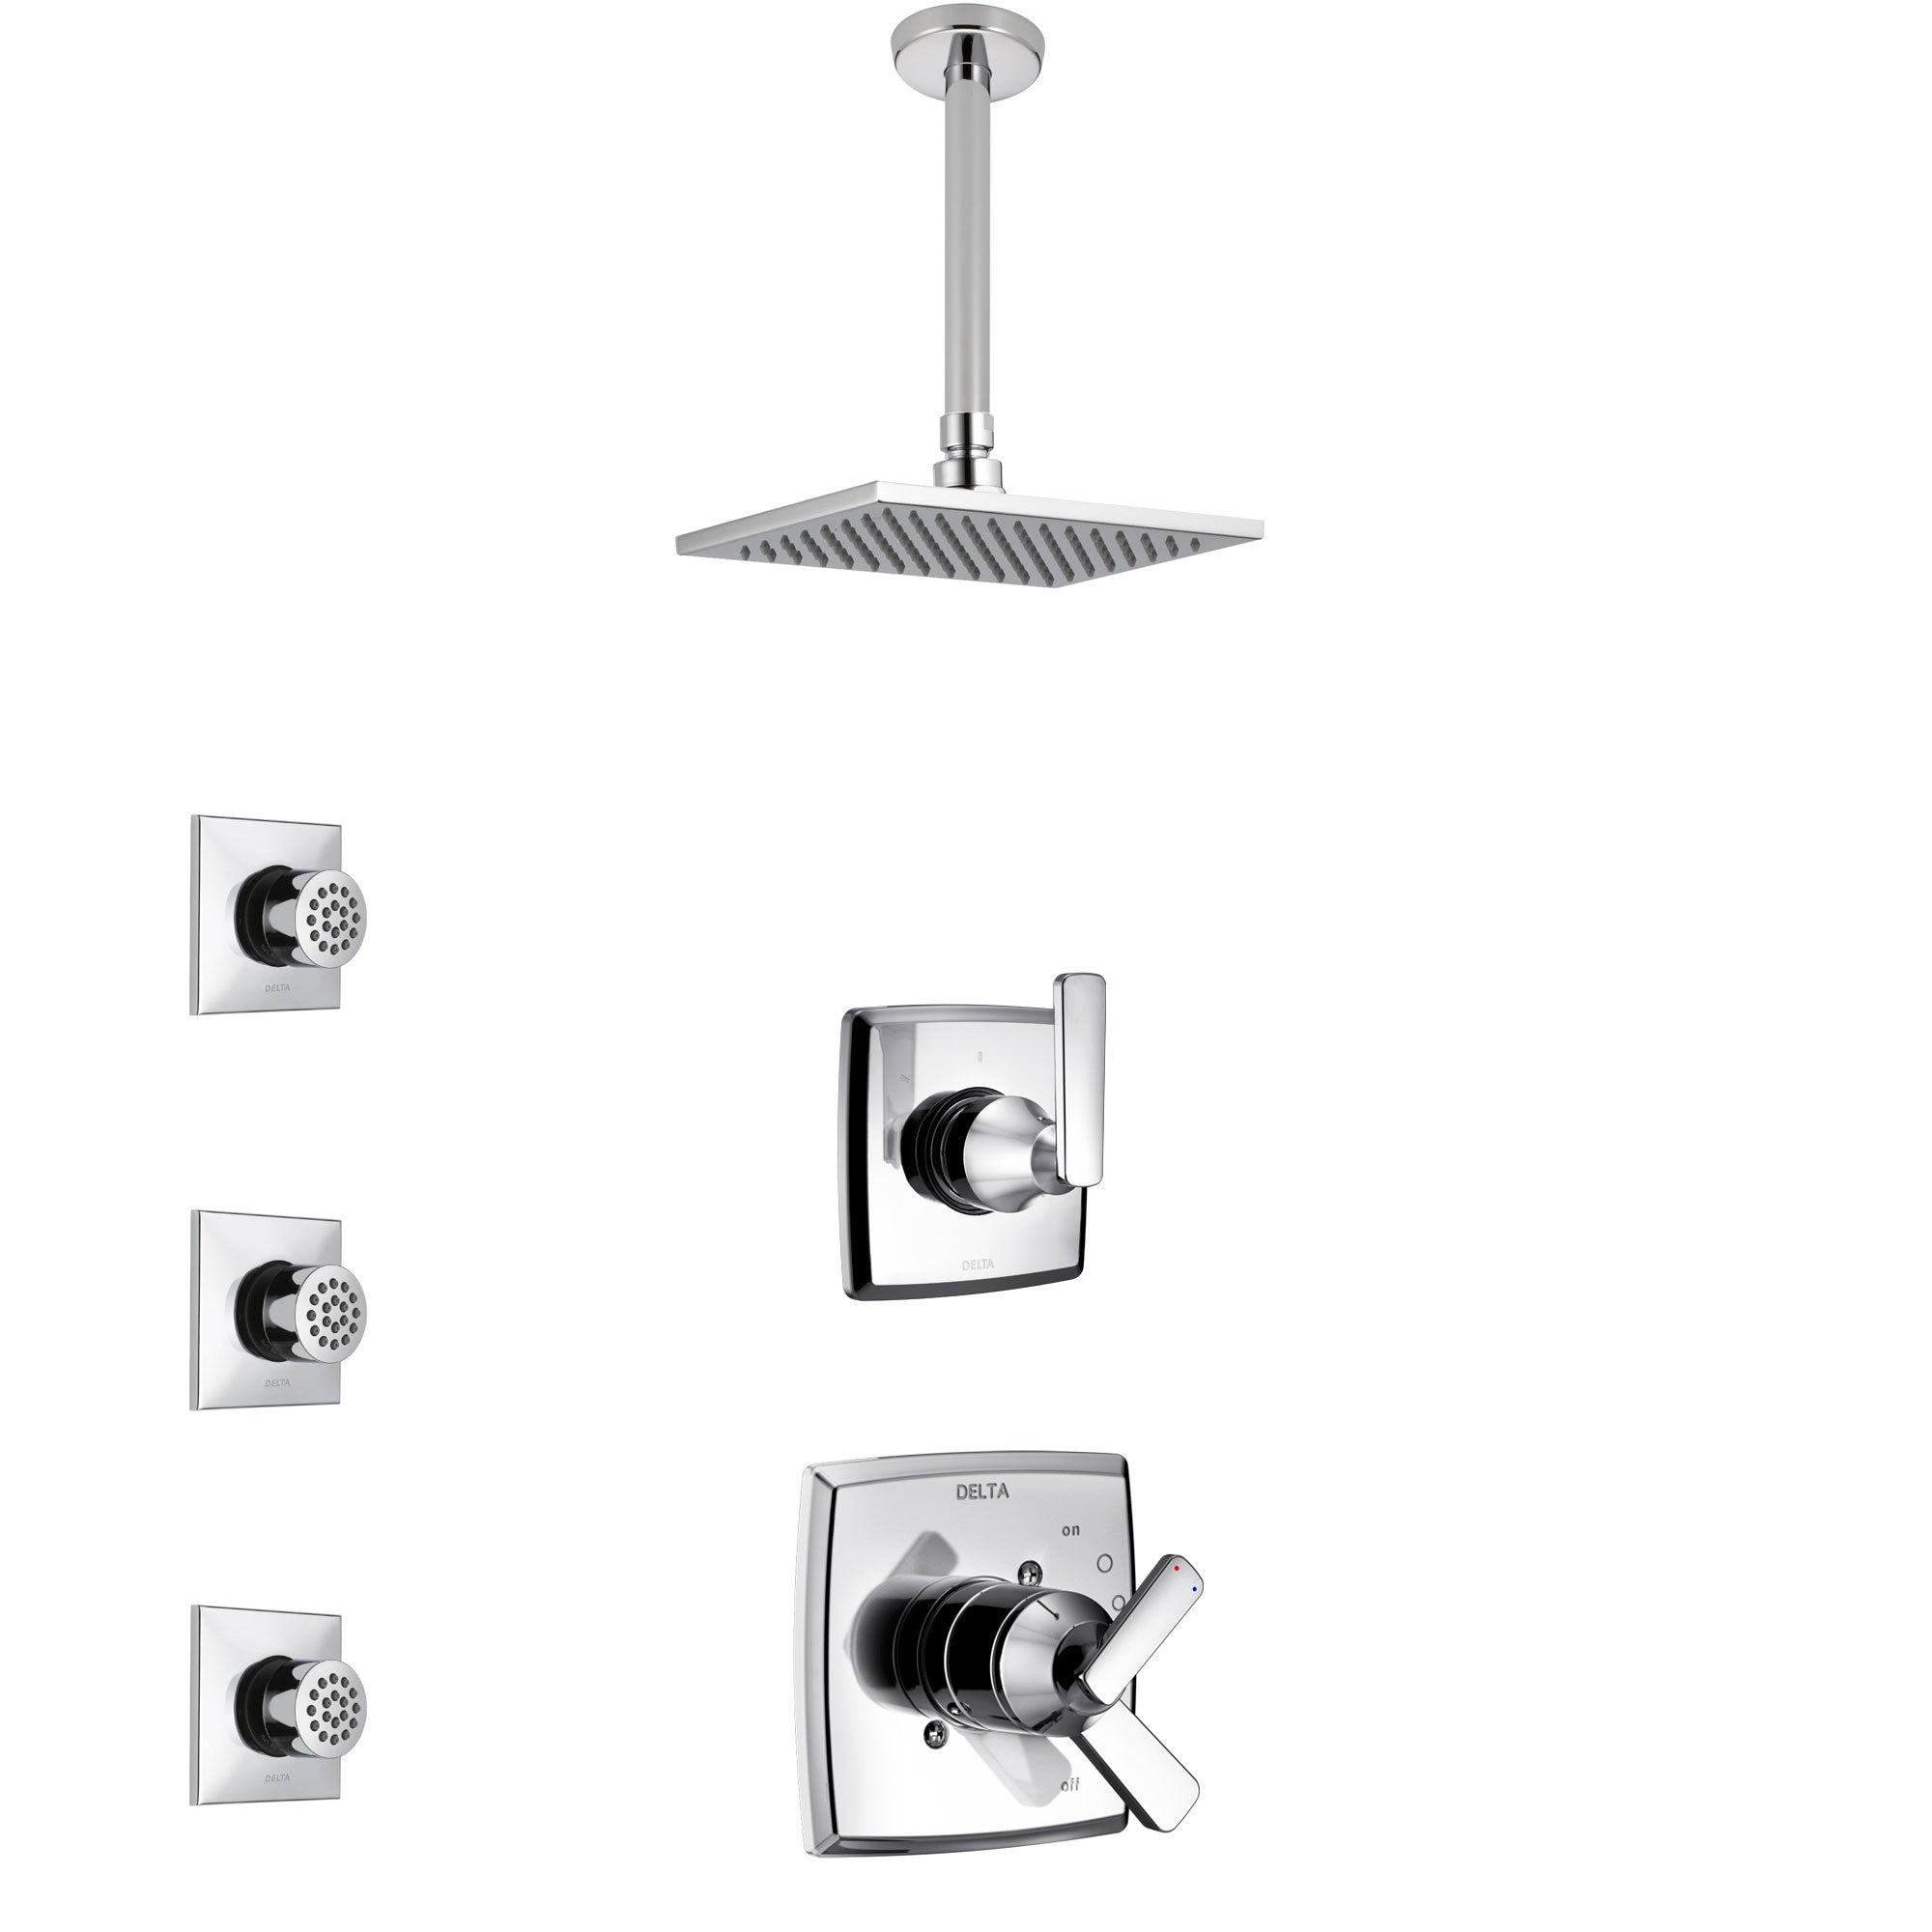 Delta Ashlyn Chrome Finish Shower System with Dual Control Handle, 3-Setting Diverter, Ceiling Mount Showerhead, and 3 Body Sprays SS17643